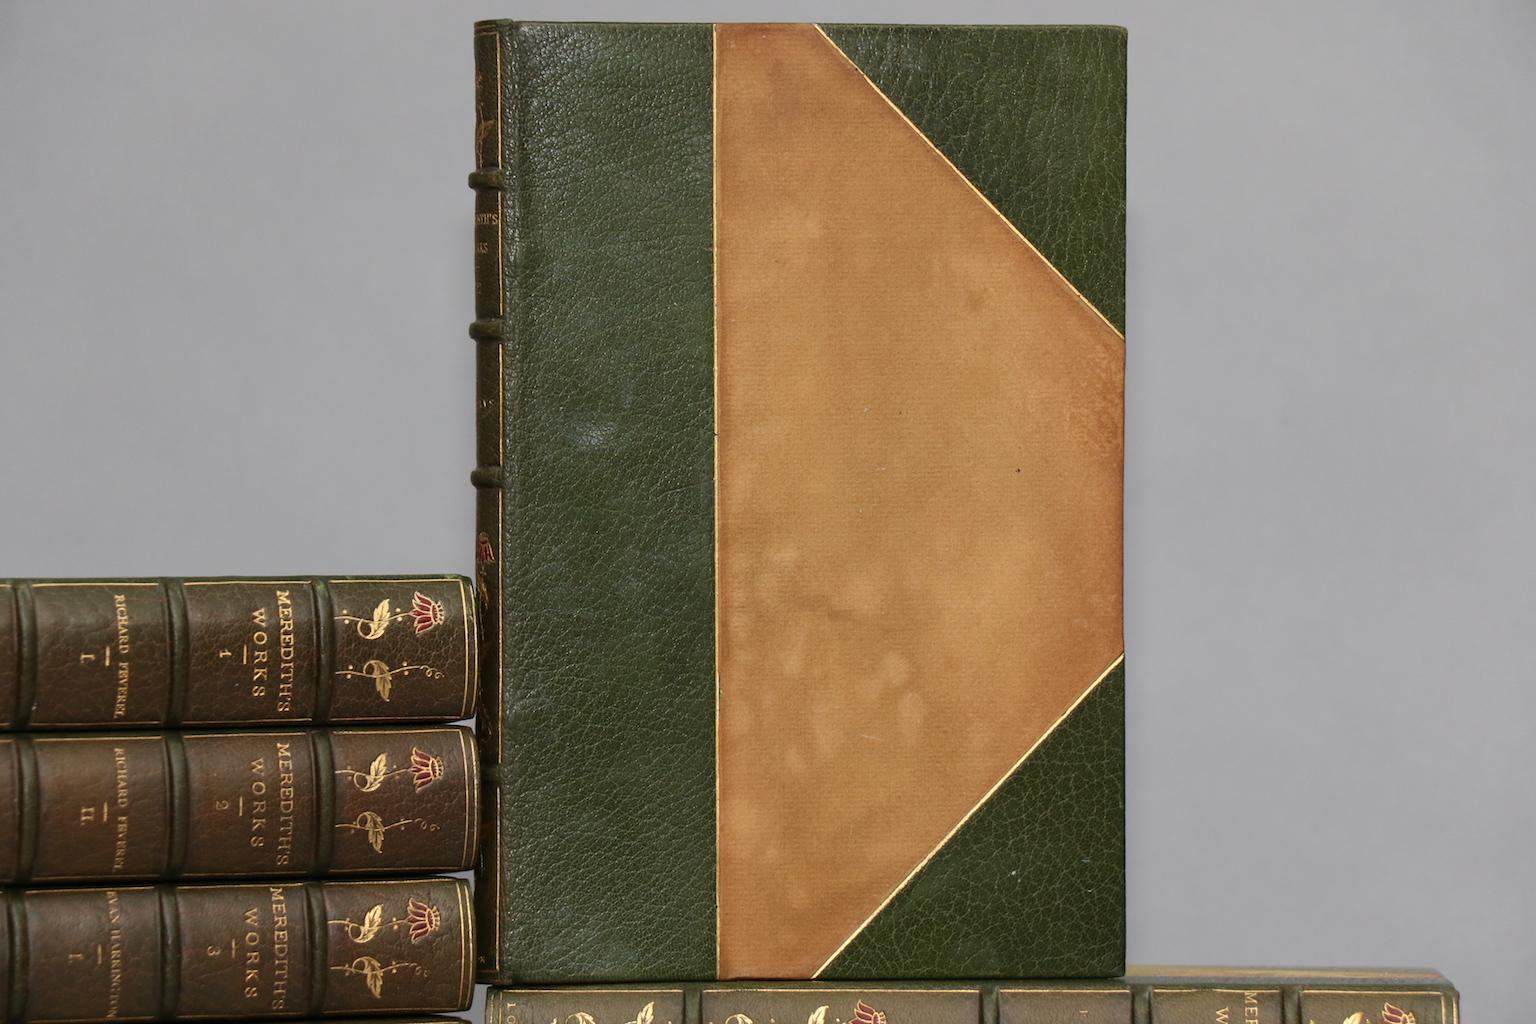 Leatherbound. 32 volumes. Bound in three-quarter green morocco leather with marbled boards, top edges gilt, raised bands, and ornate floral gilt tooling on spines. Very good. Published in Westminster by Archibald Constable & Co. in 1896.

George